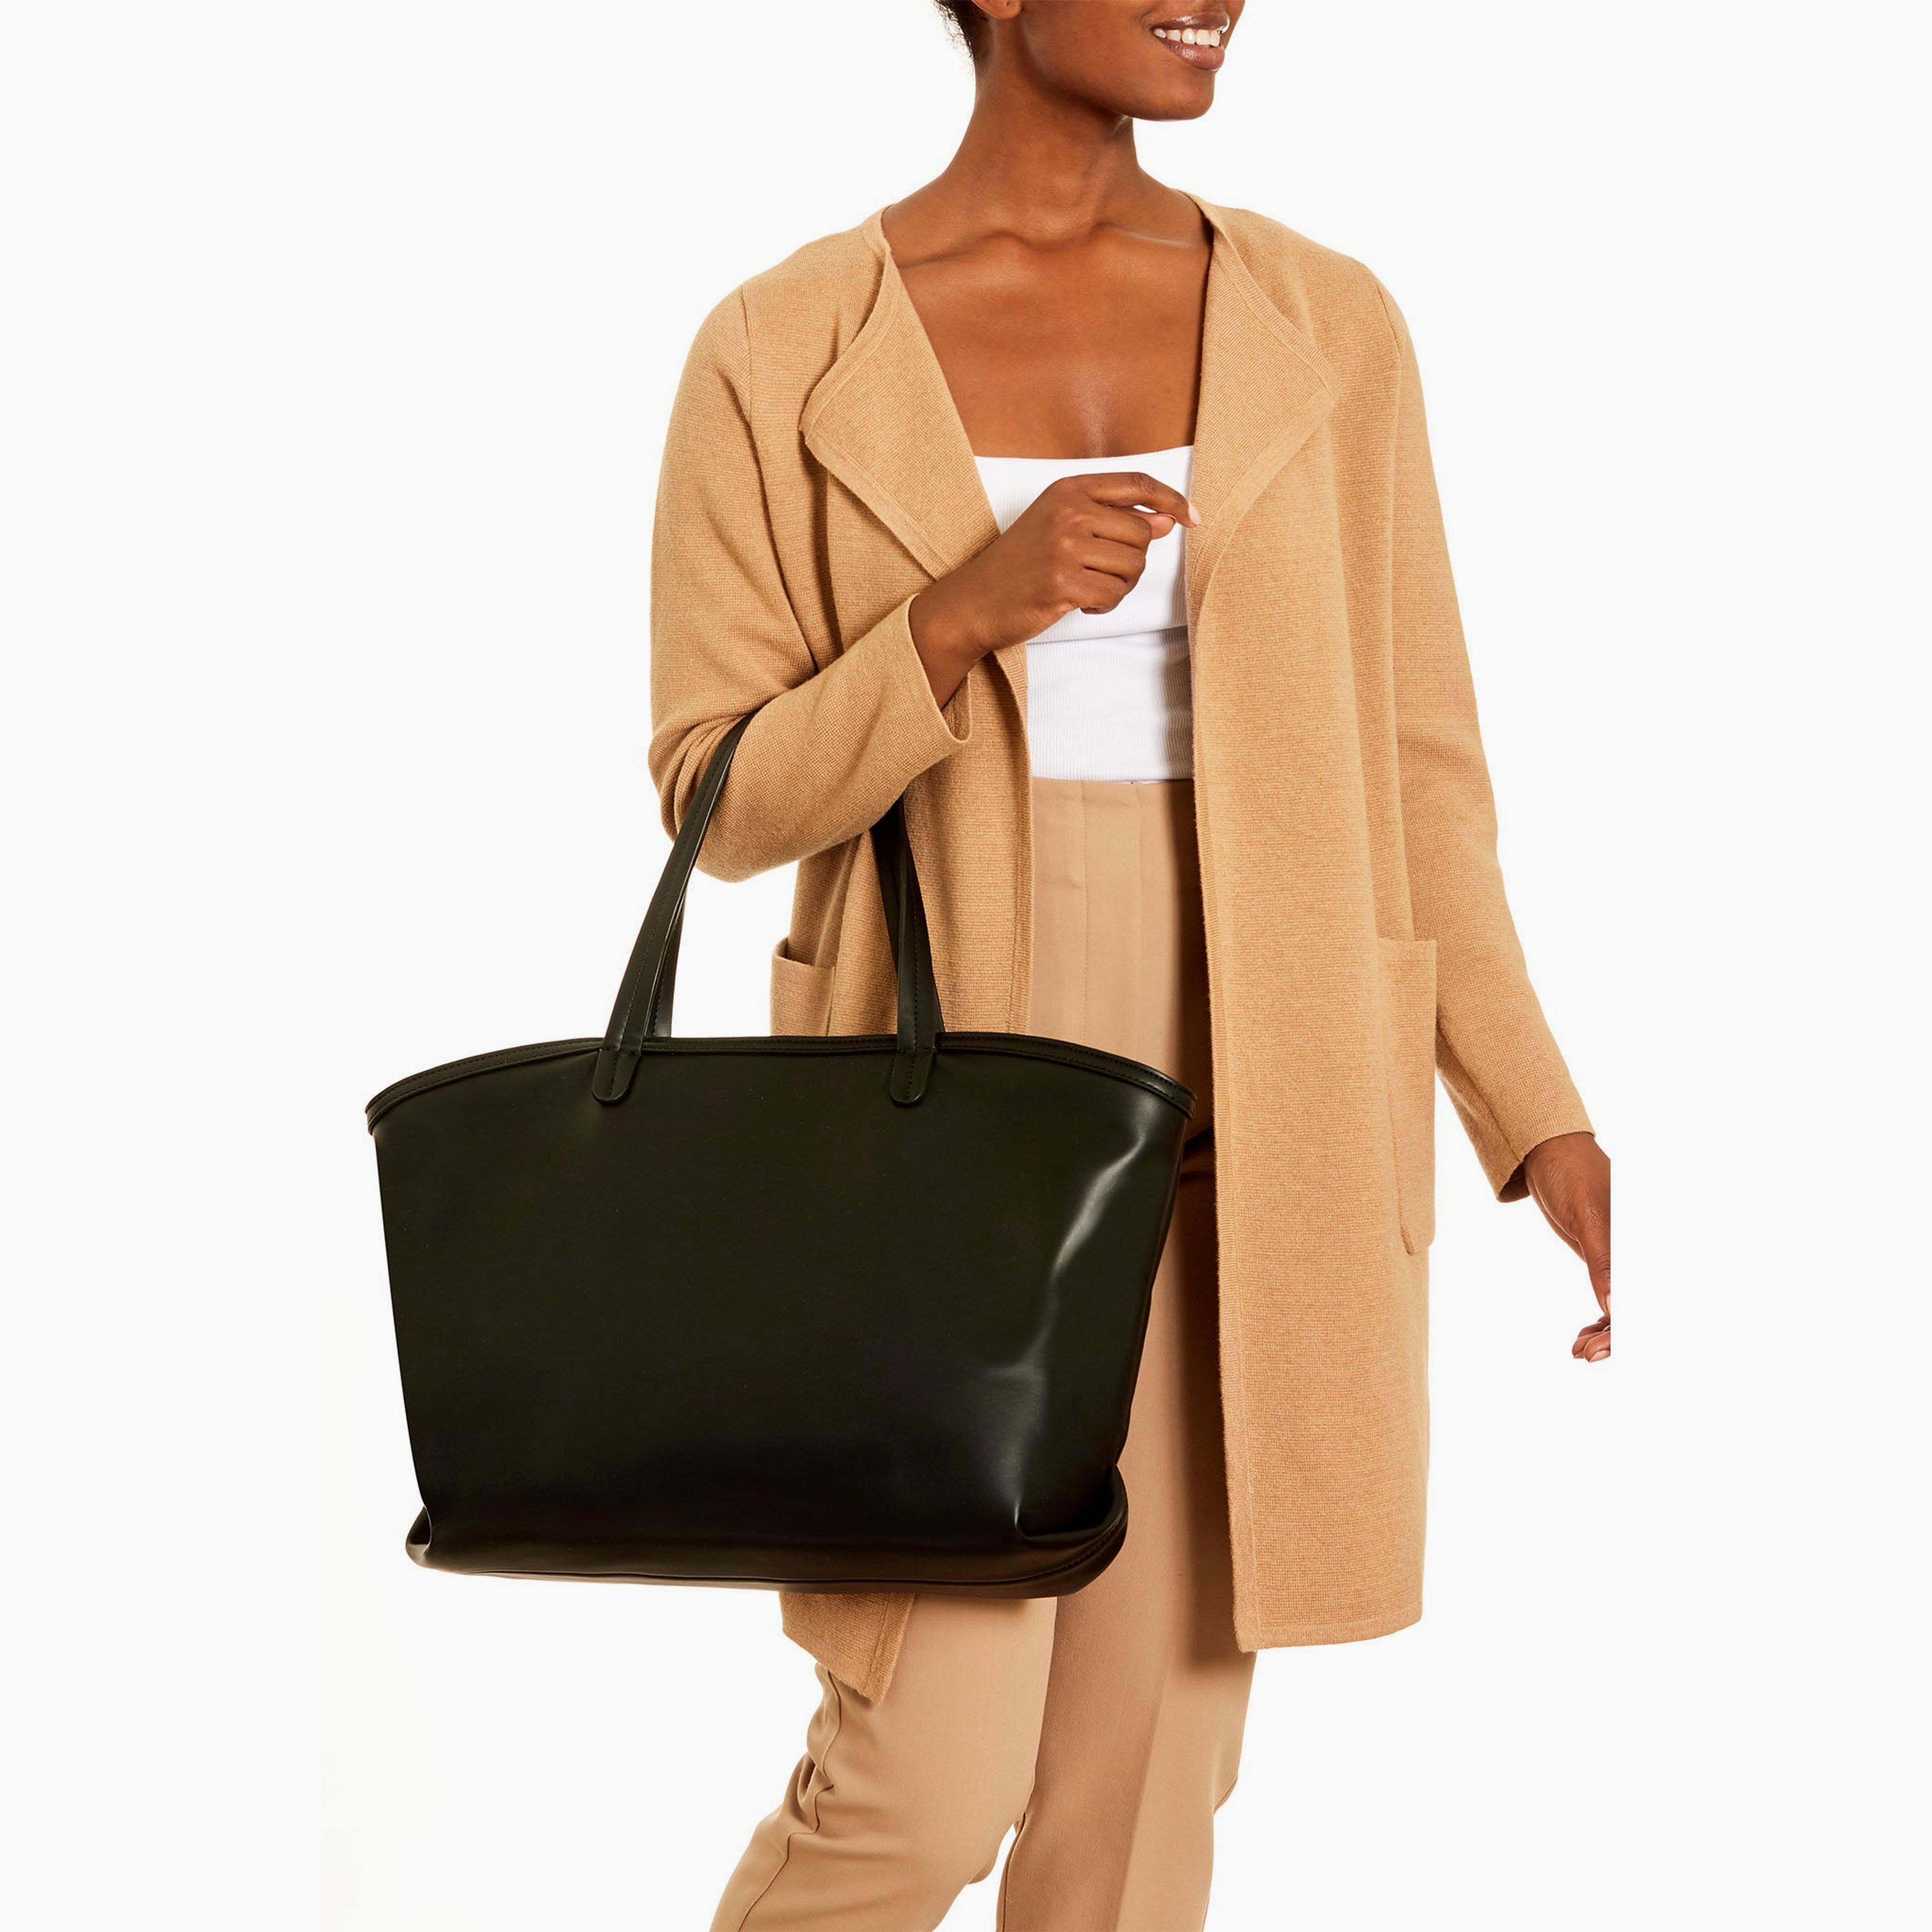 Black Every Day Tote